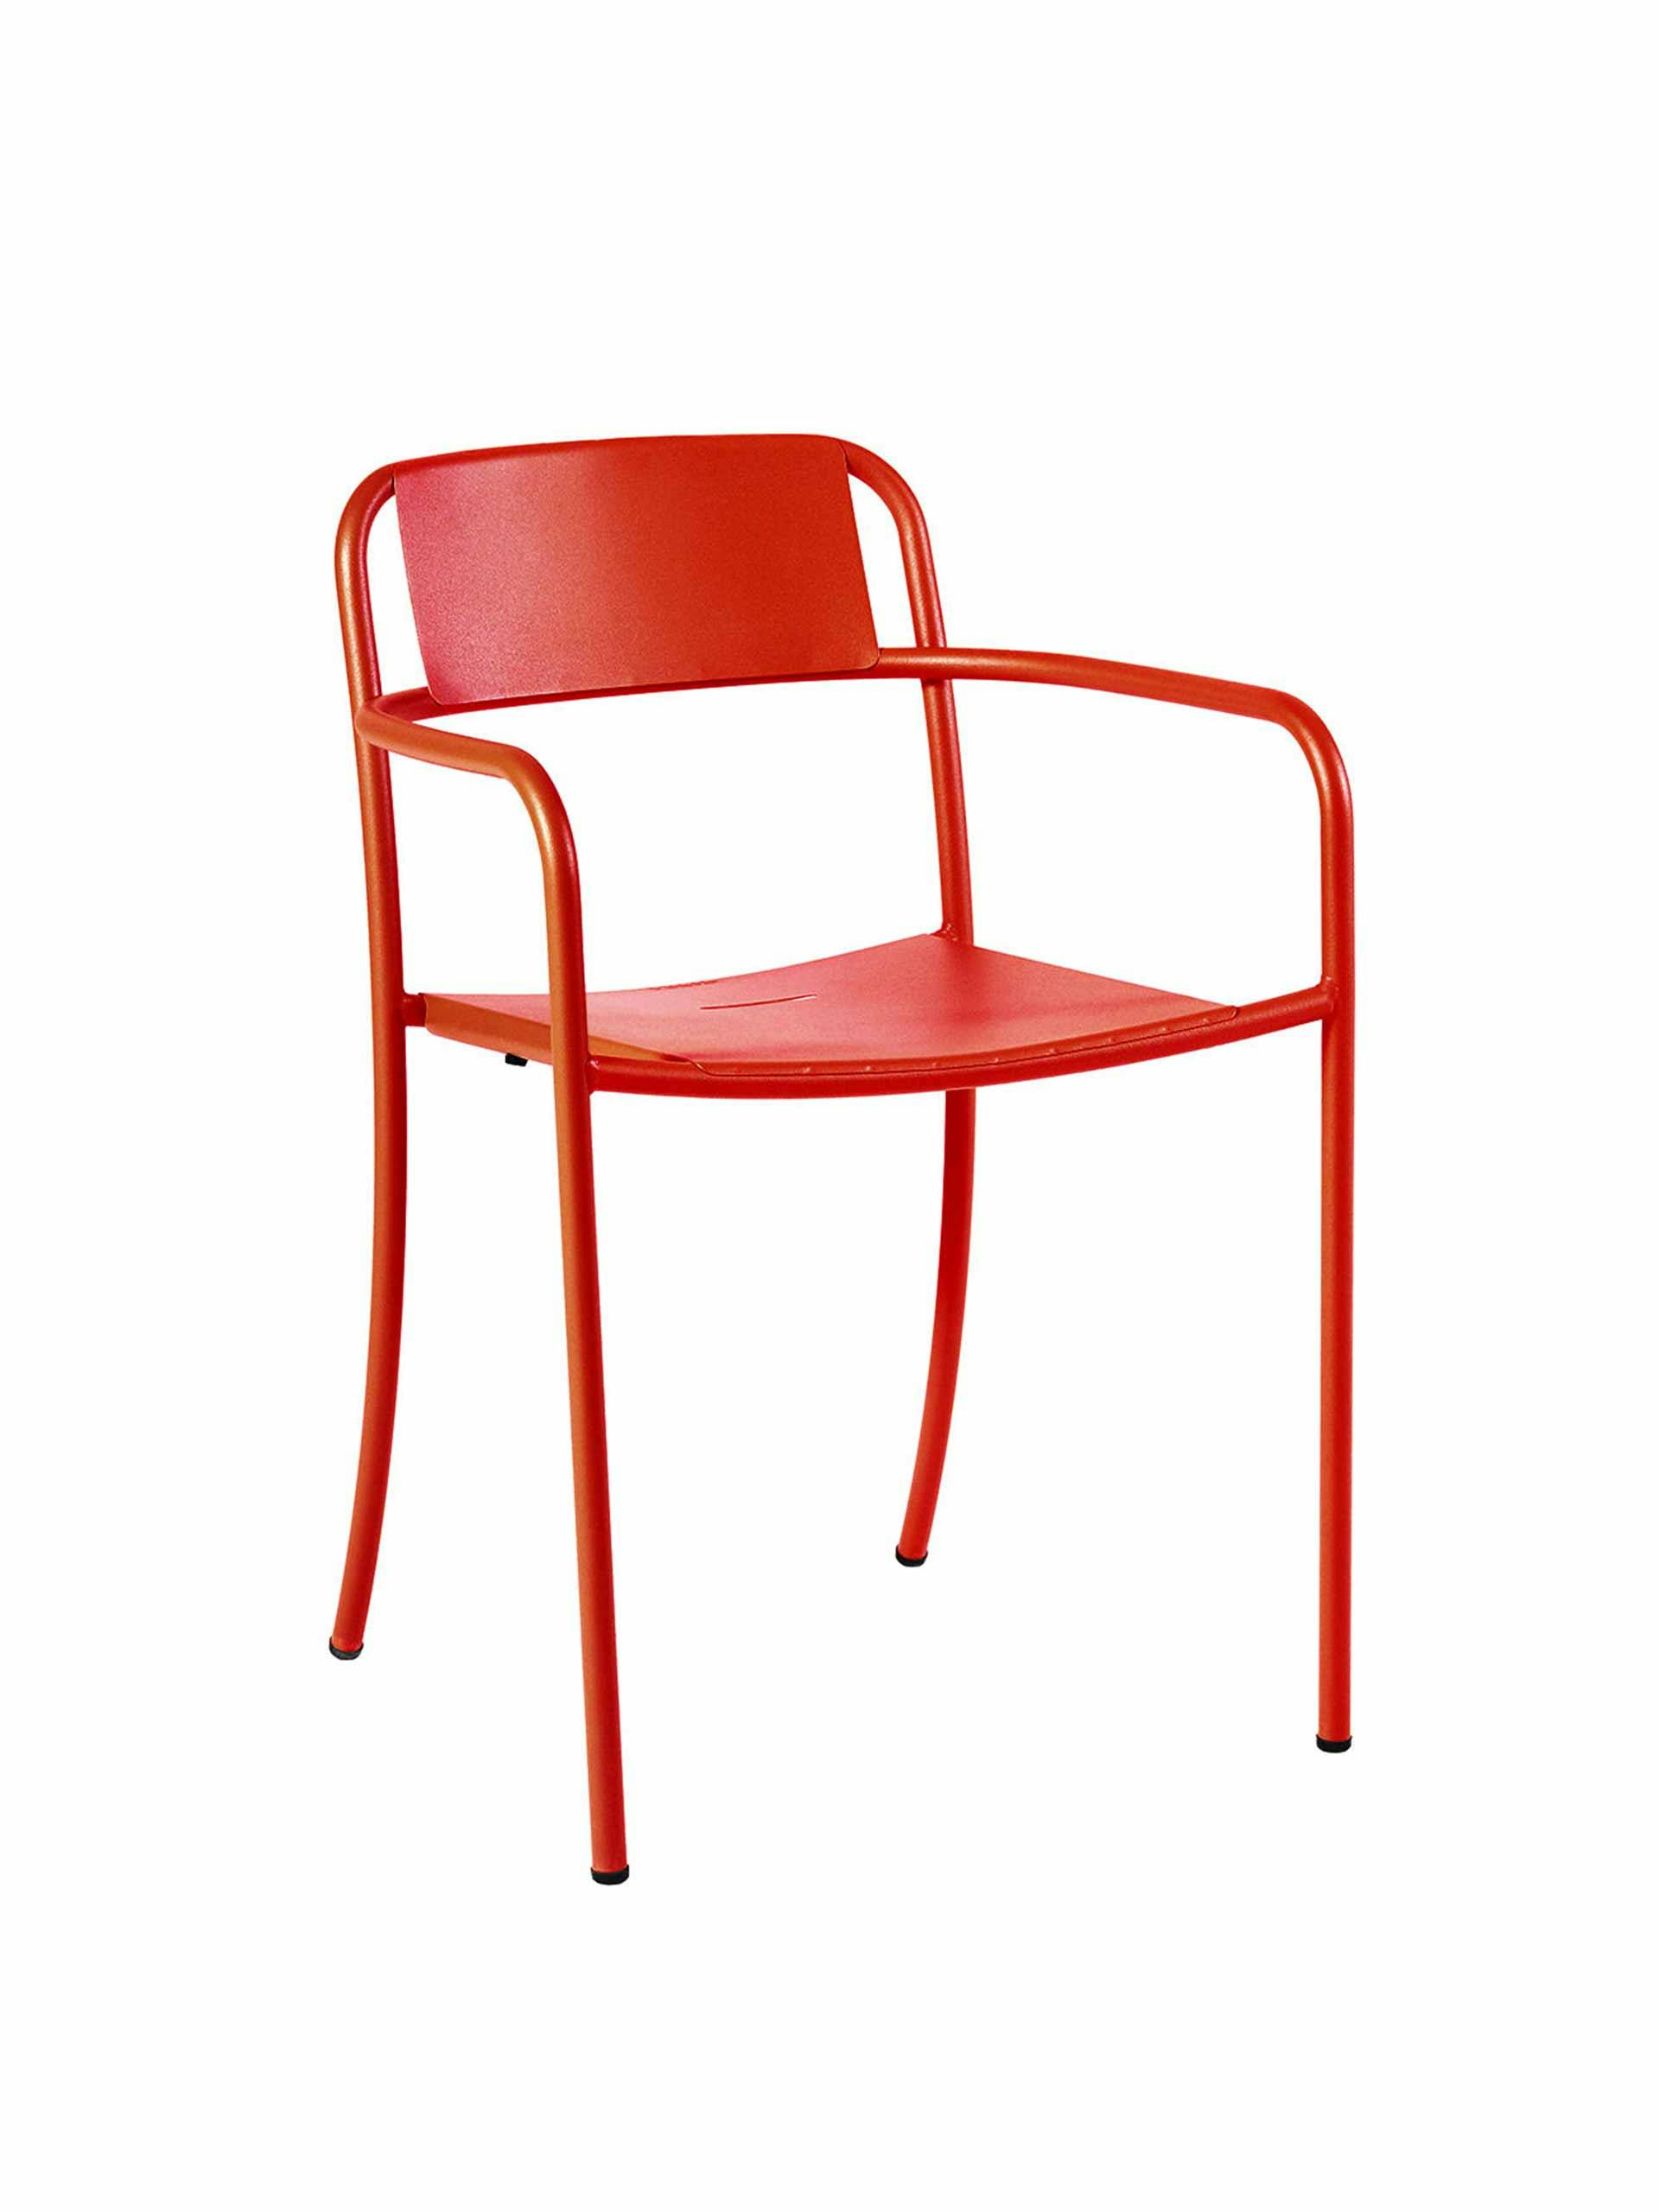 Stainless steel red armchair